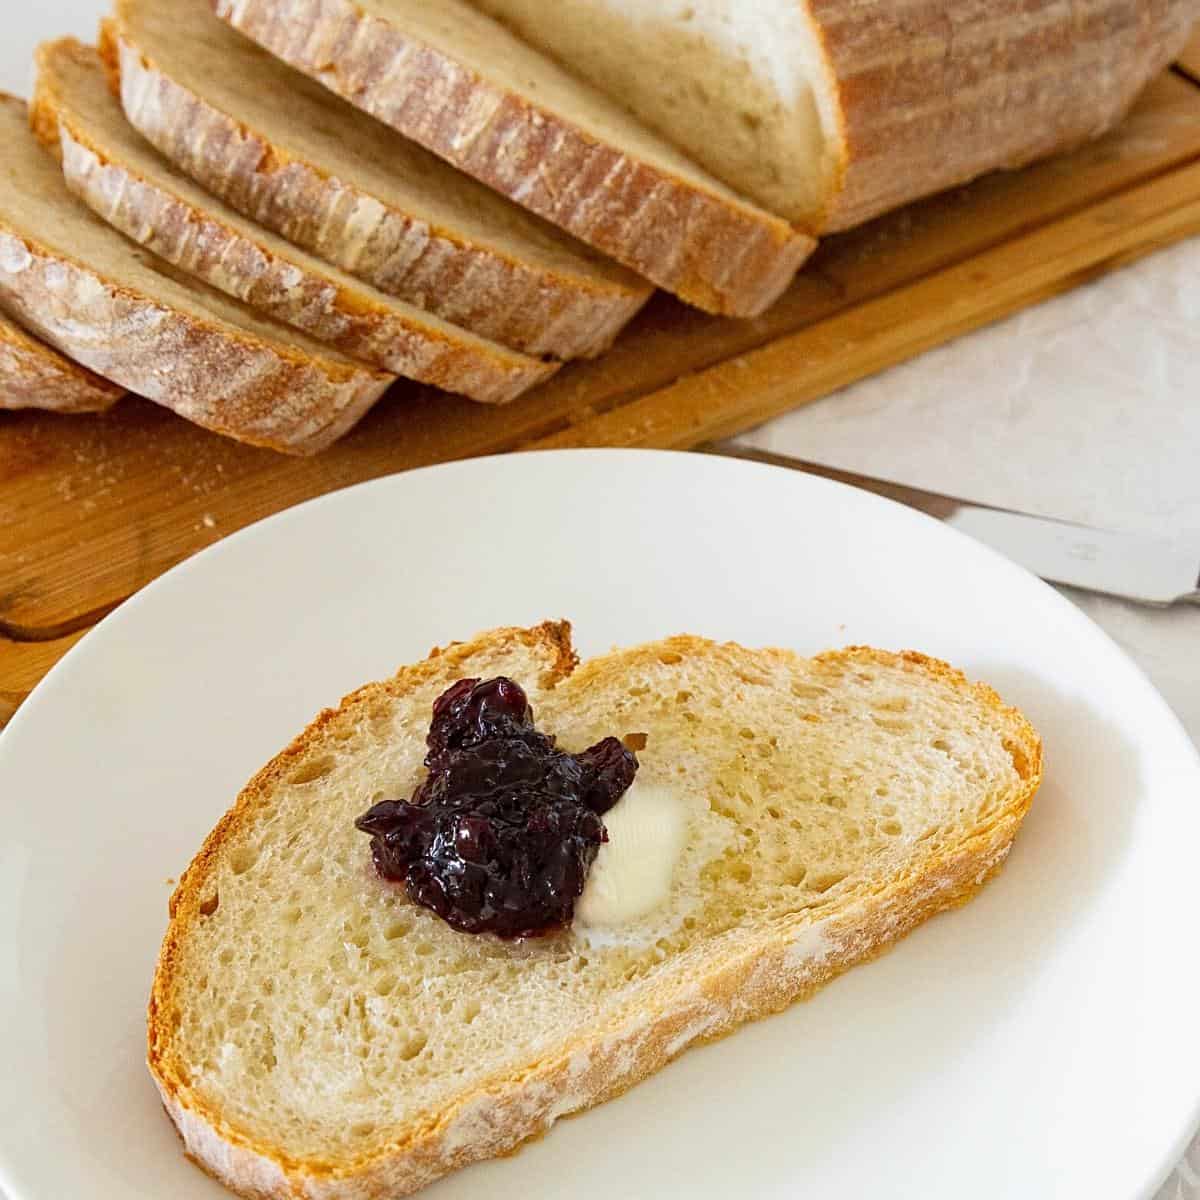 A slice of sourdough on the plate with jam.